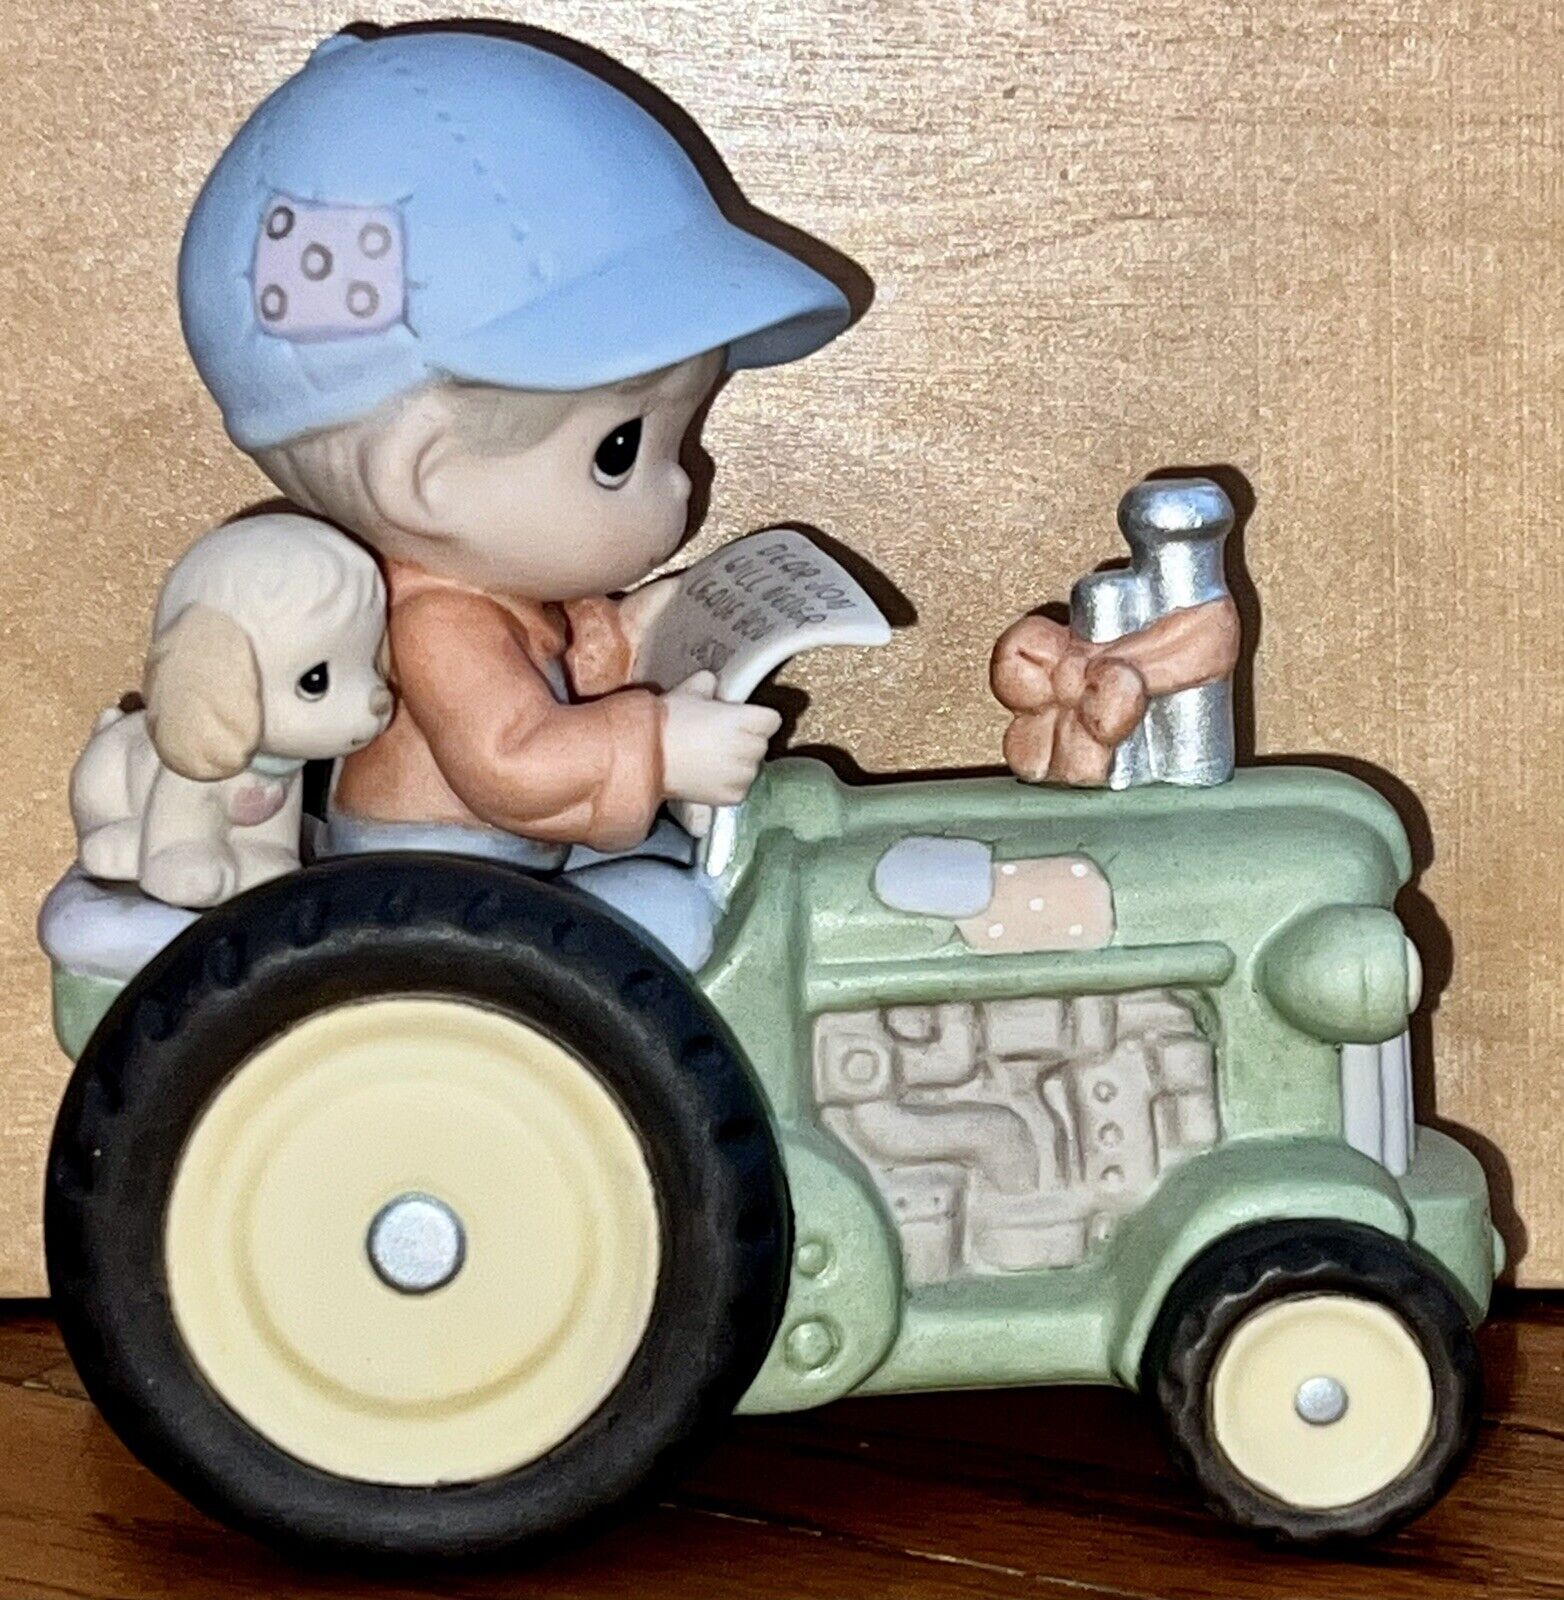 Buy 2 Get 1 Precious Moments-“Dear Jon, I will never leave you, Jesus”Tractor(2)